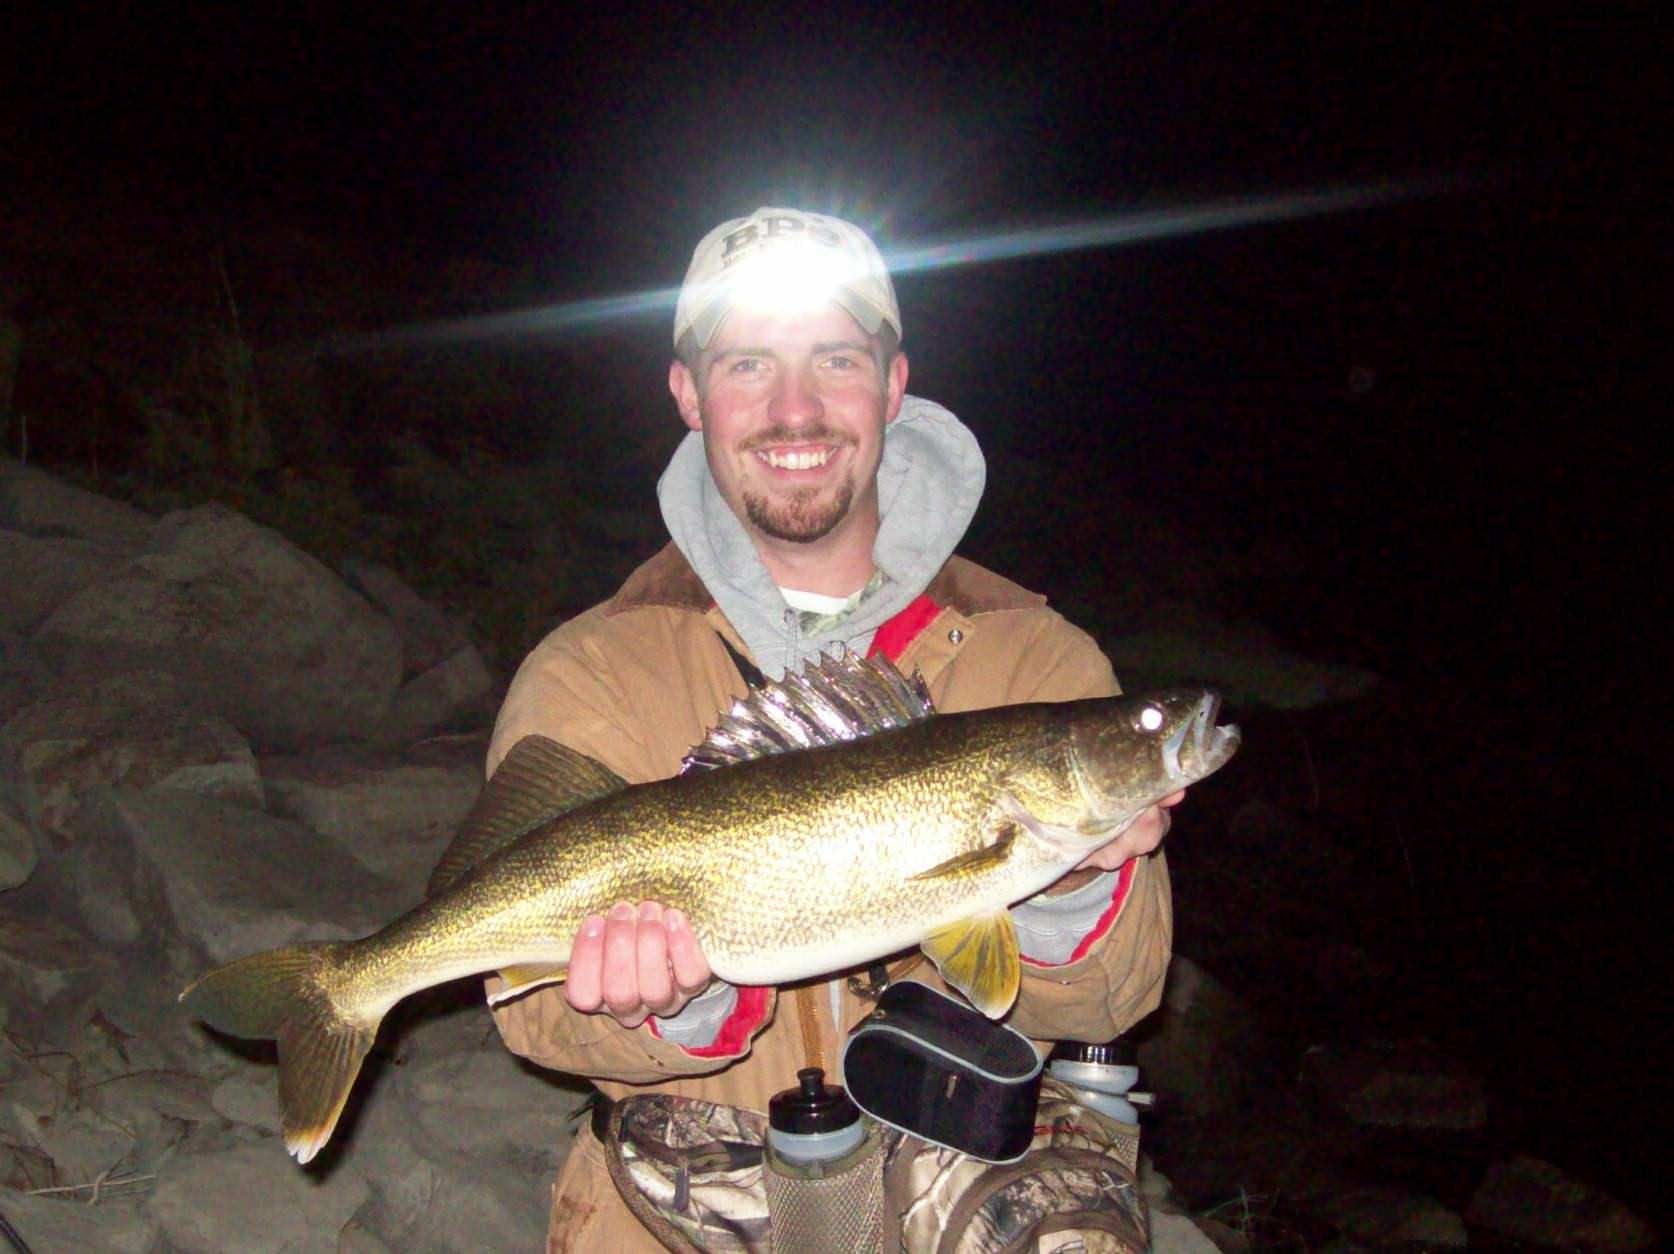 RadCast Outdoors Episode #13: Spring Walleye Fishing with RadCast Outdoors Co-Host, Patrick Edwards